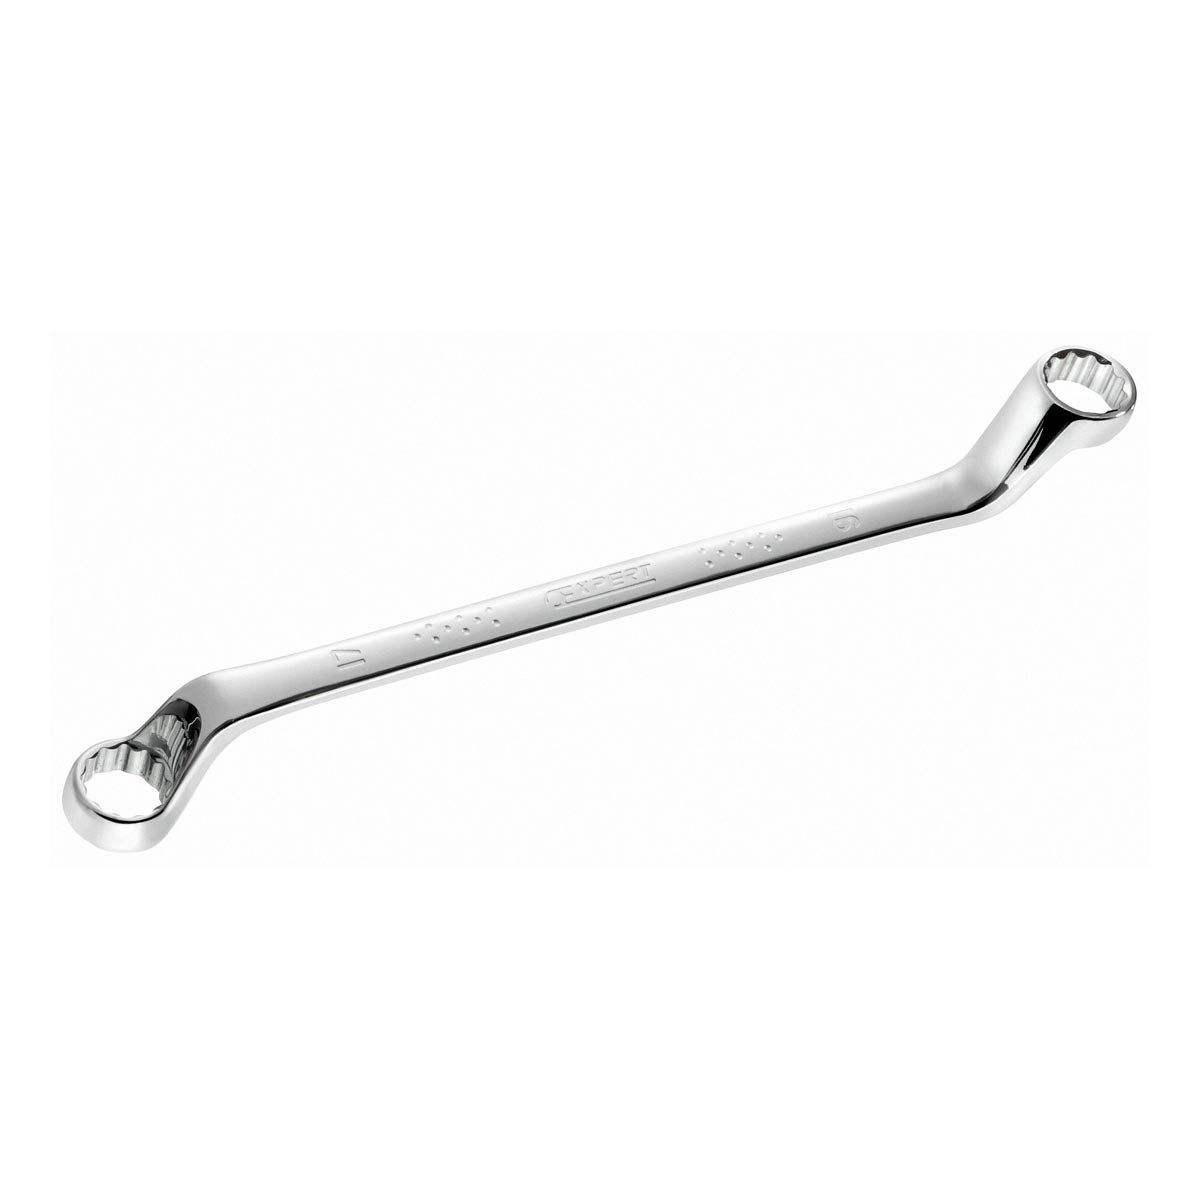 Expert by Facom E111501B Offset Ring Wrench - 8X10mm